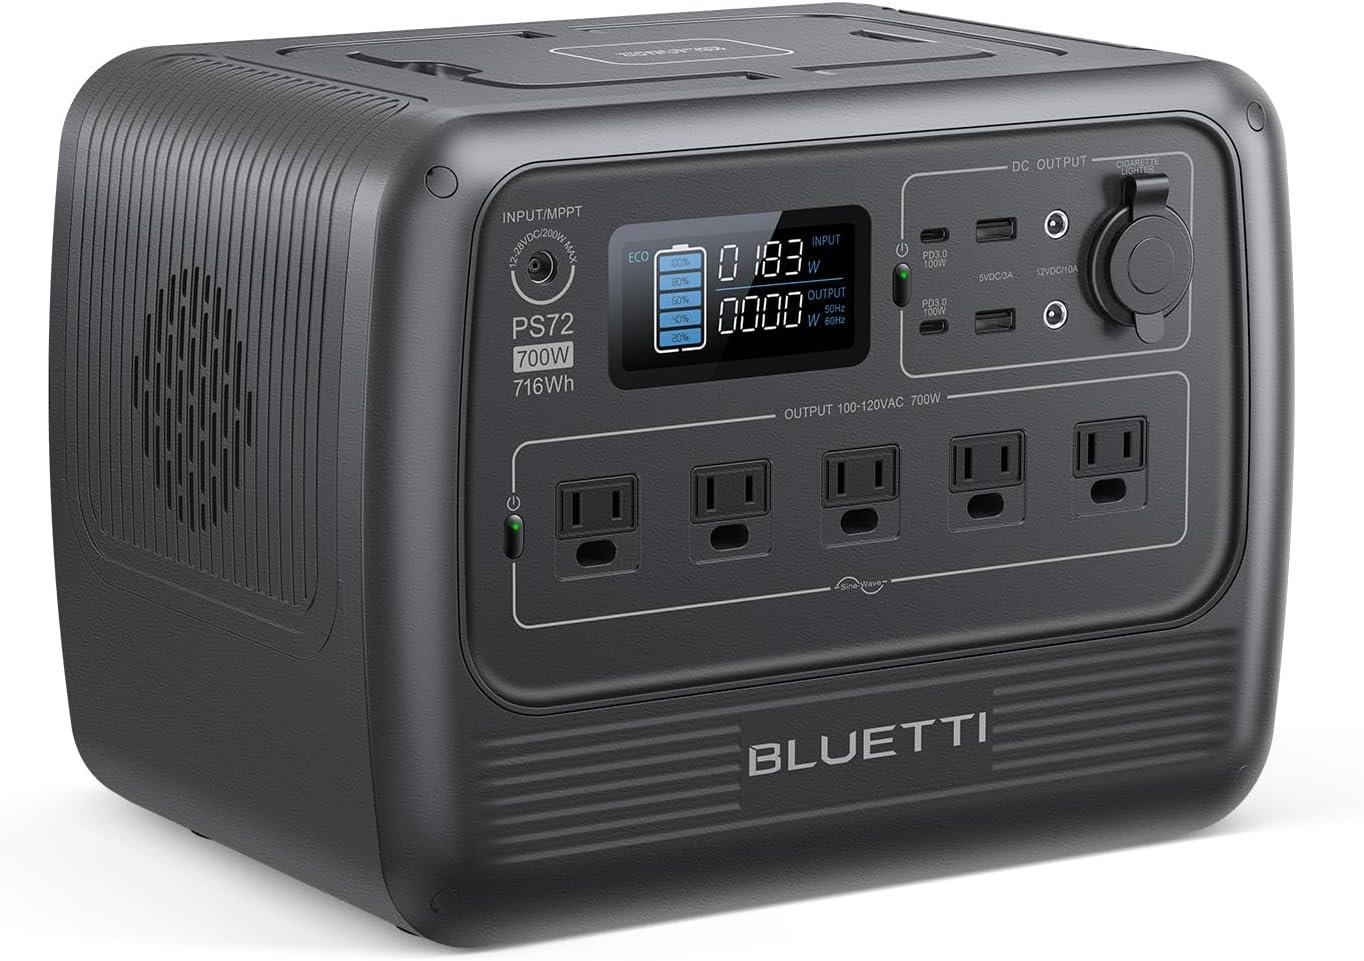 BLUETTI Portable Power Station PS72 Review